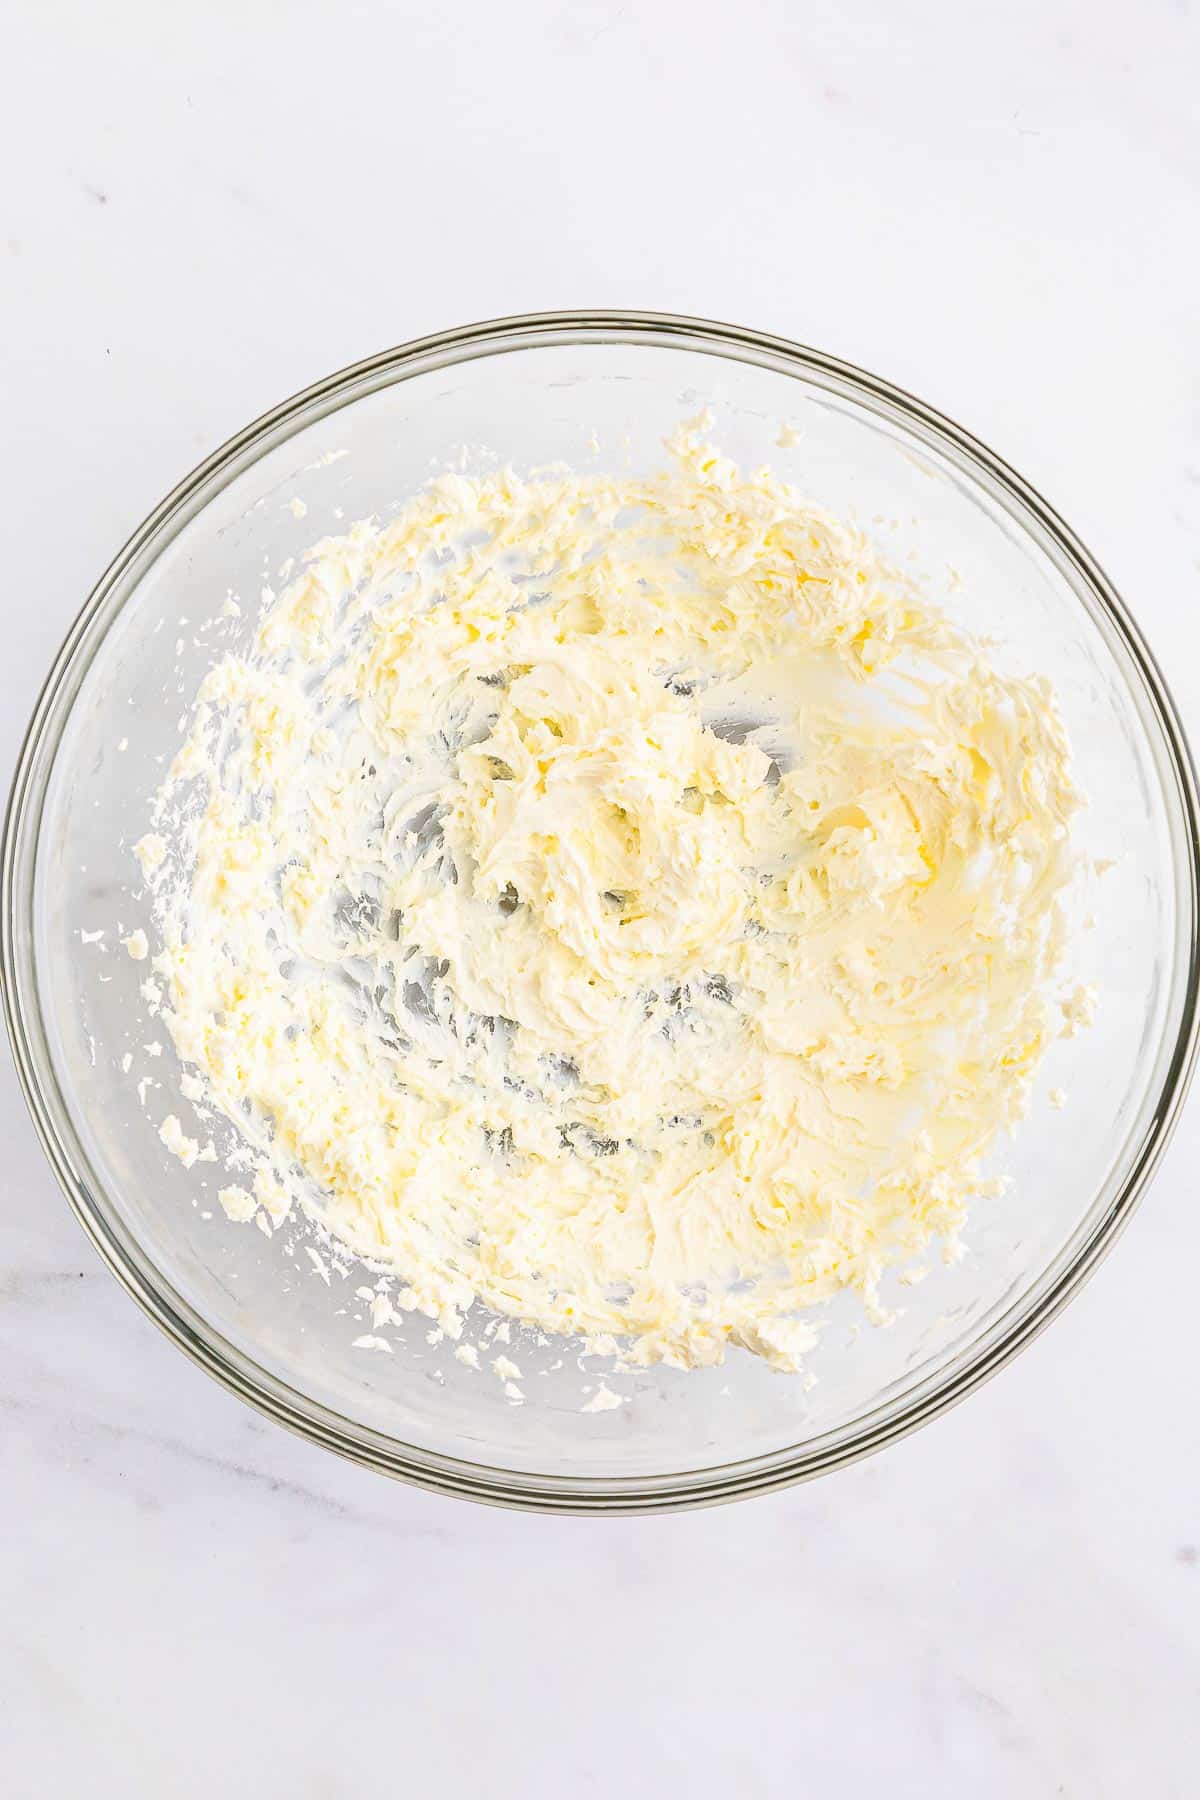 Cream cheese beaten in a glass mixing bowl.